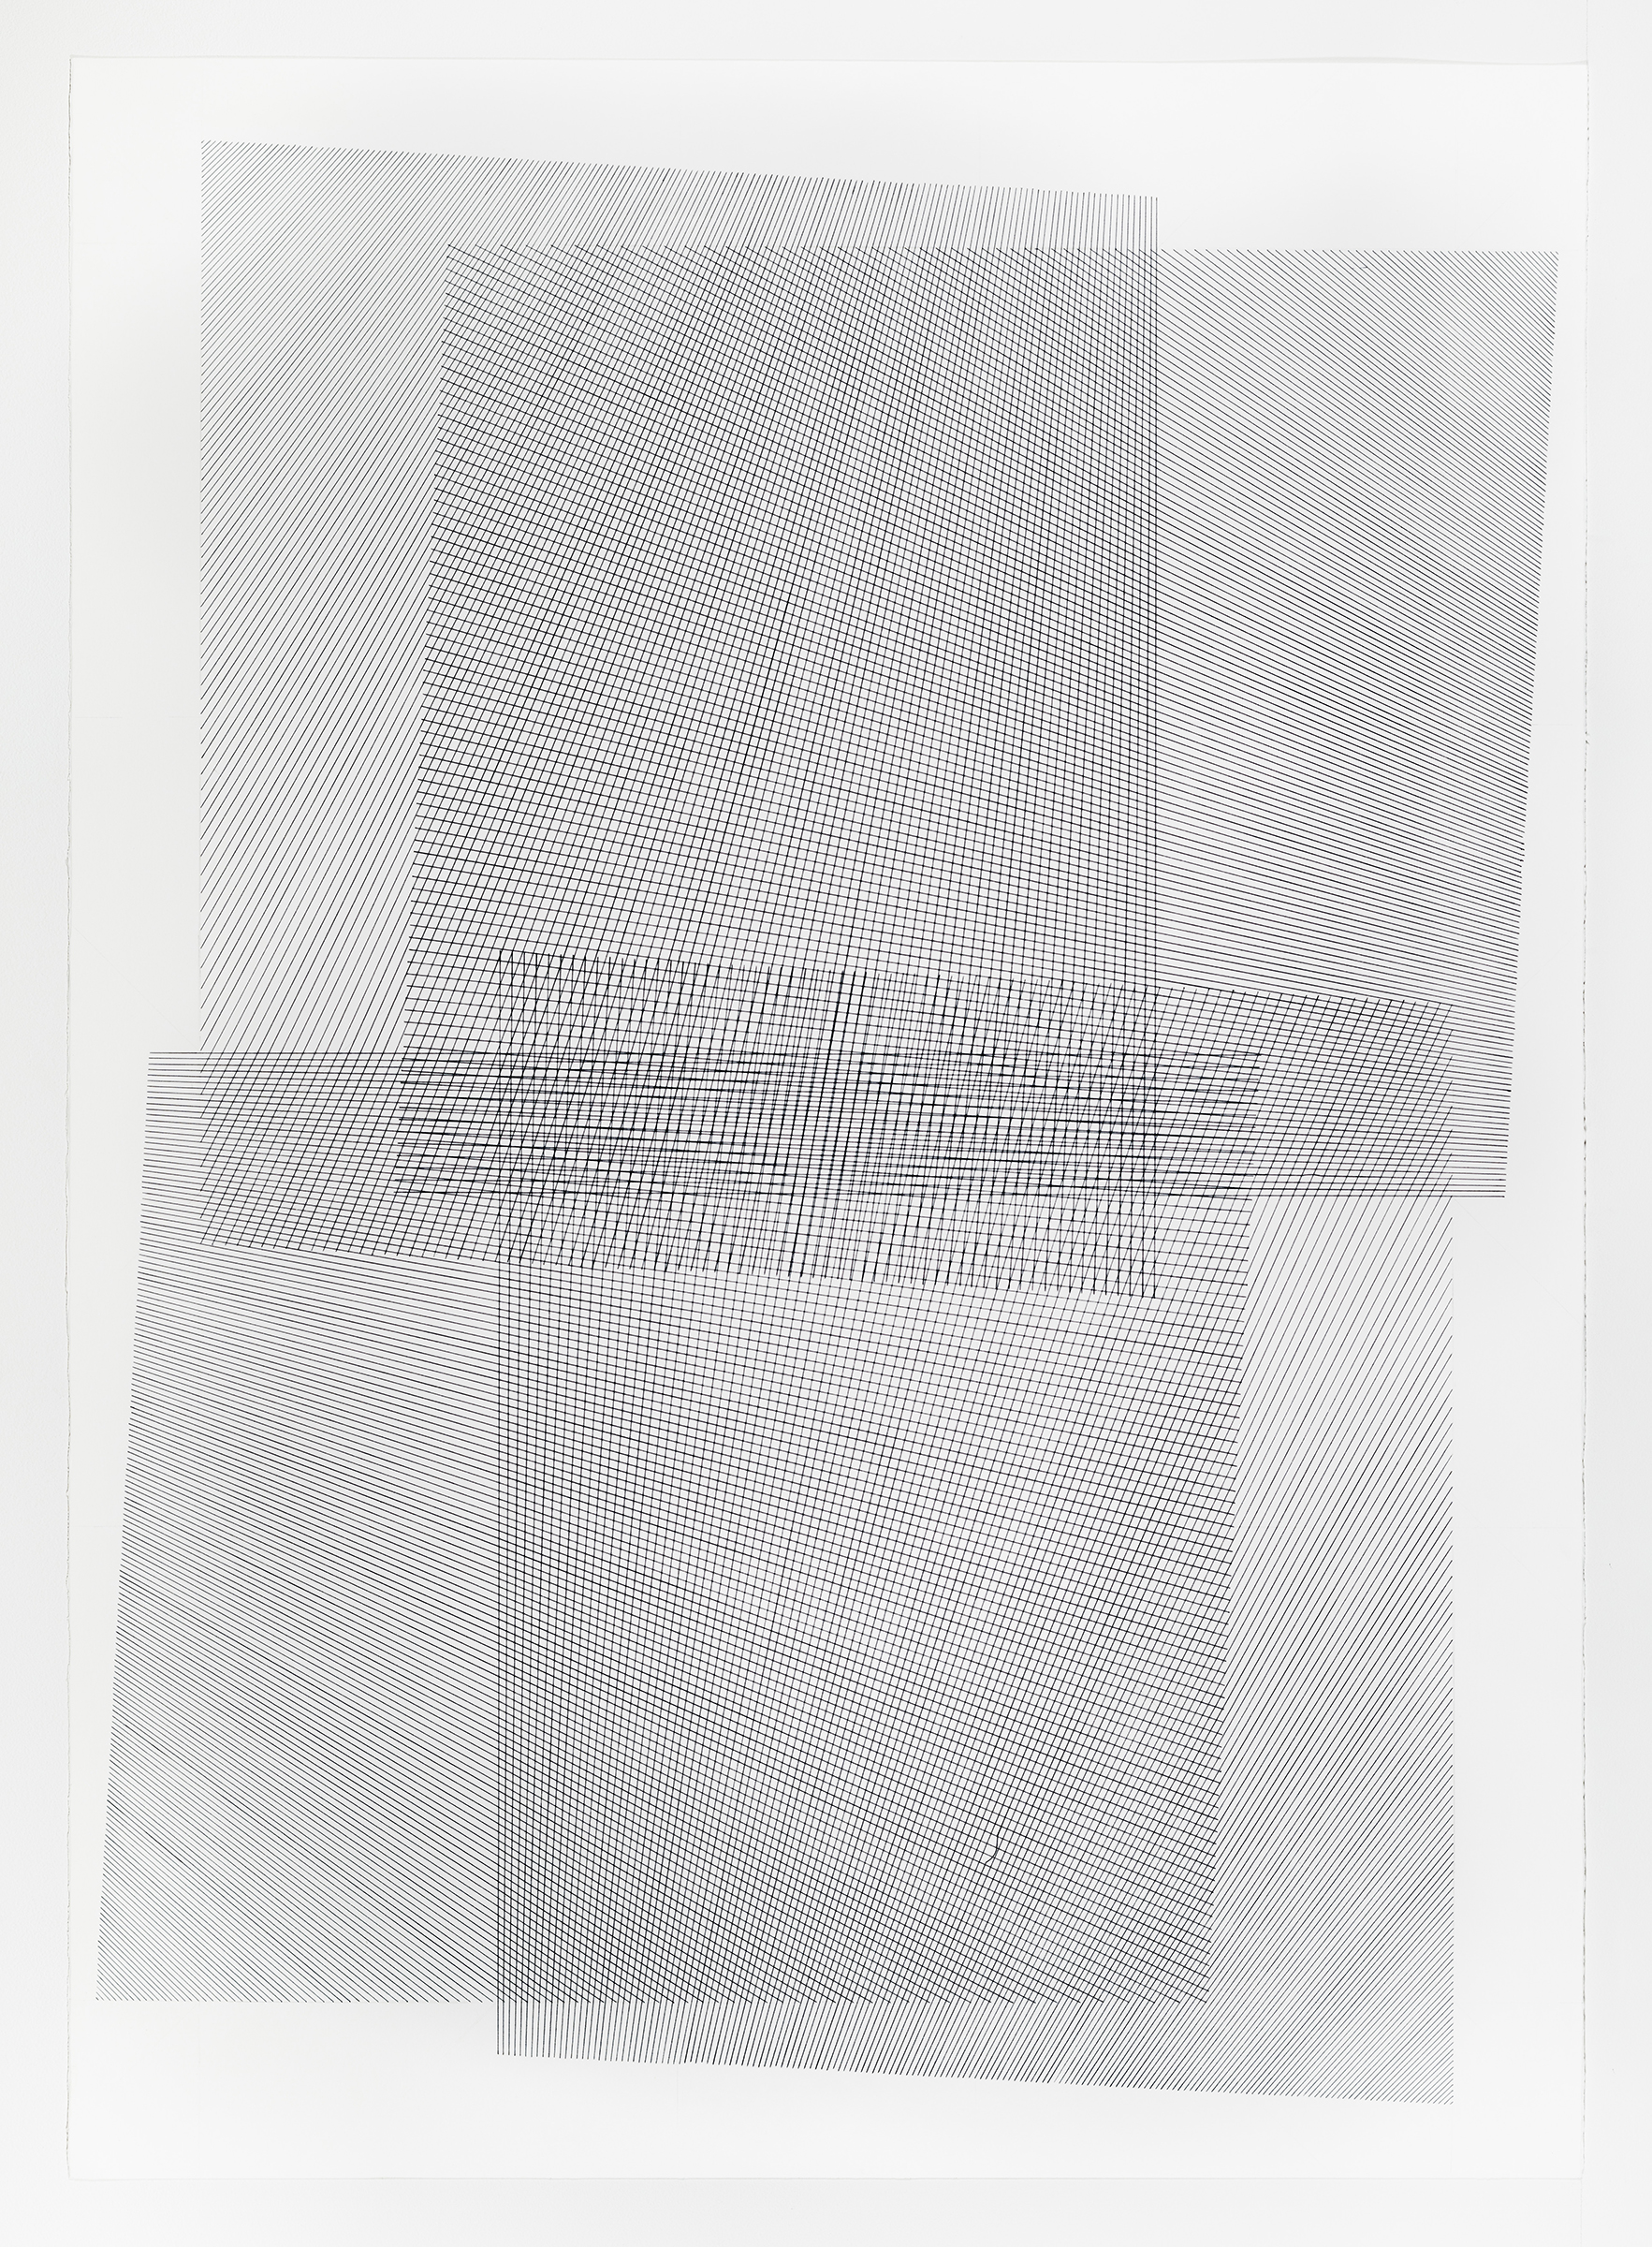 1 of 5; additive series, grey, 40 x 30 inches, 2016